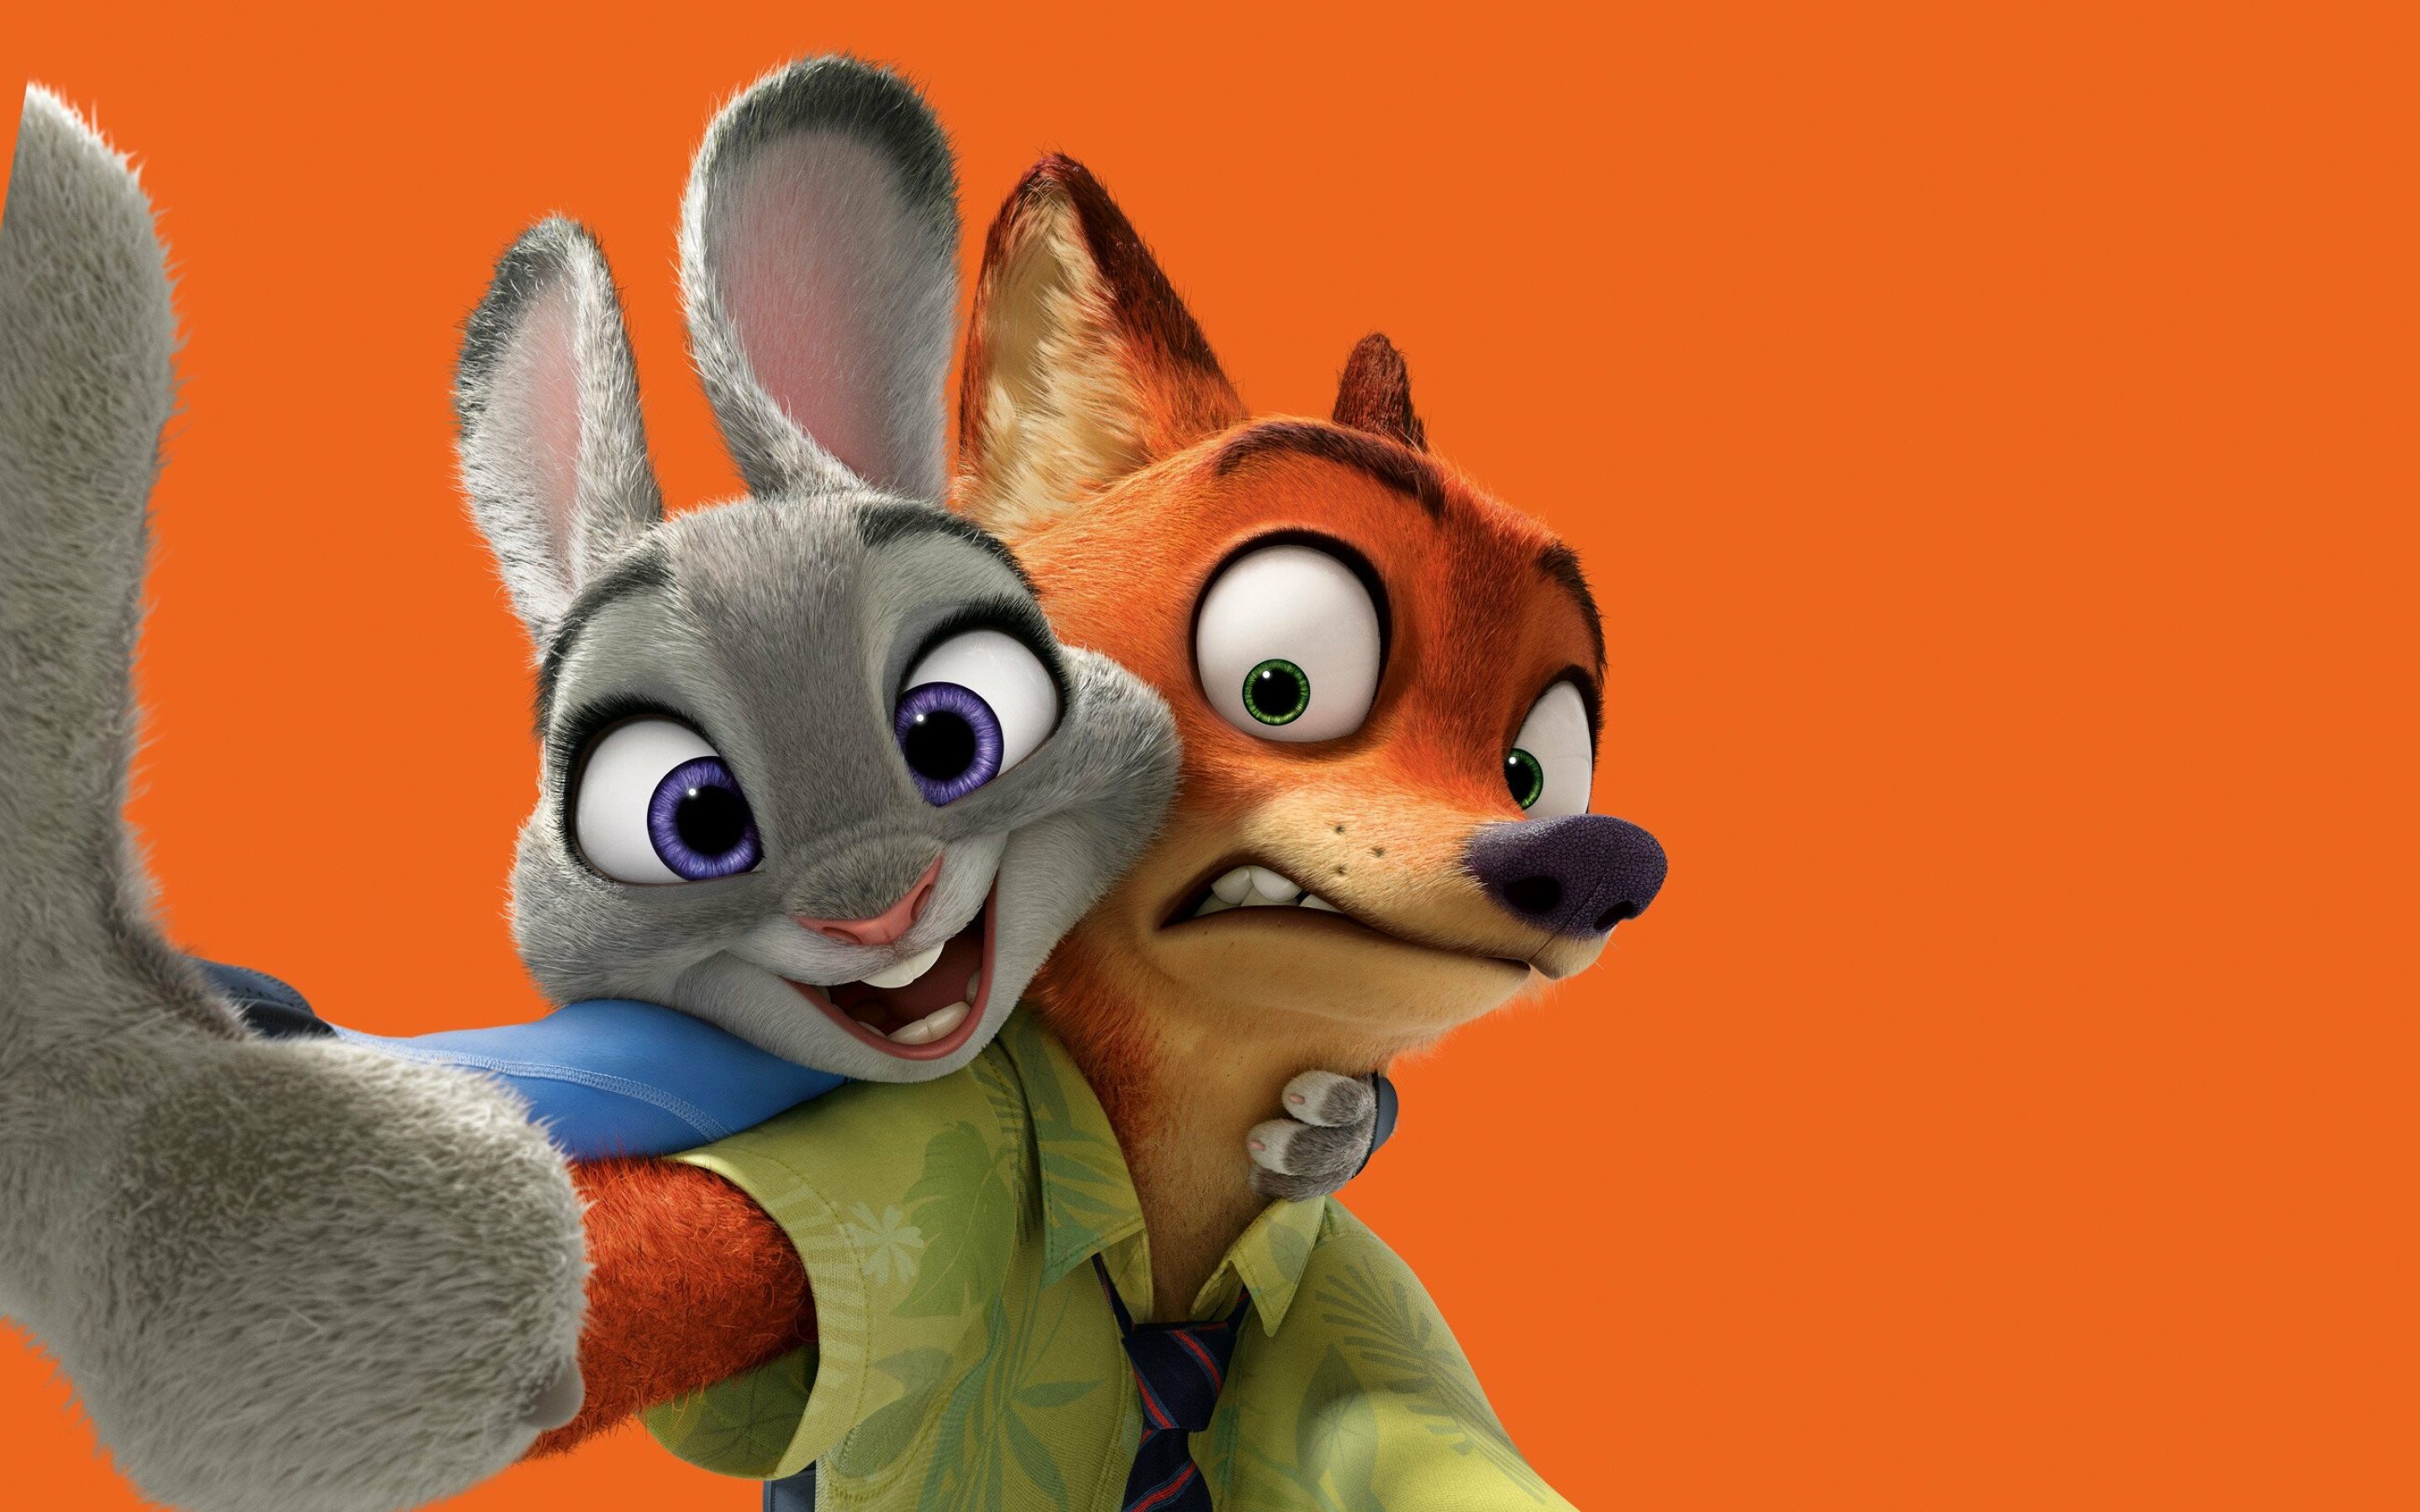 Zootopia: Premiered at the Brussels Animation Film Festival in Belgium on February 13, 2016, and went into general theatrical release in Disney Digital 3-D, RealD 3D, IMAX 3D, and 4DX formats in the United States on March 4. 2880x1800 HD Background.